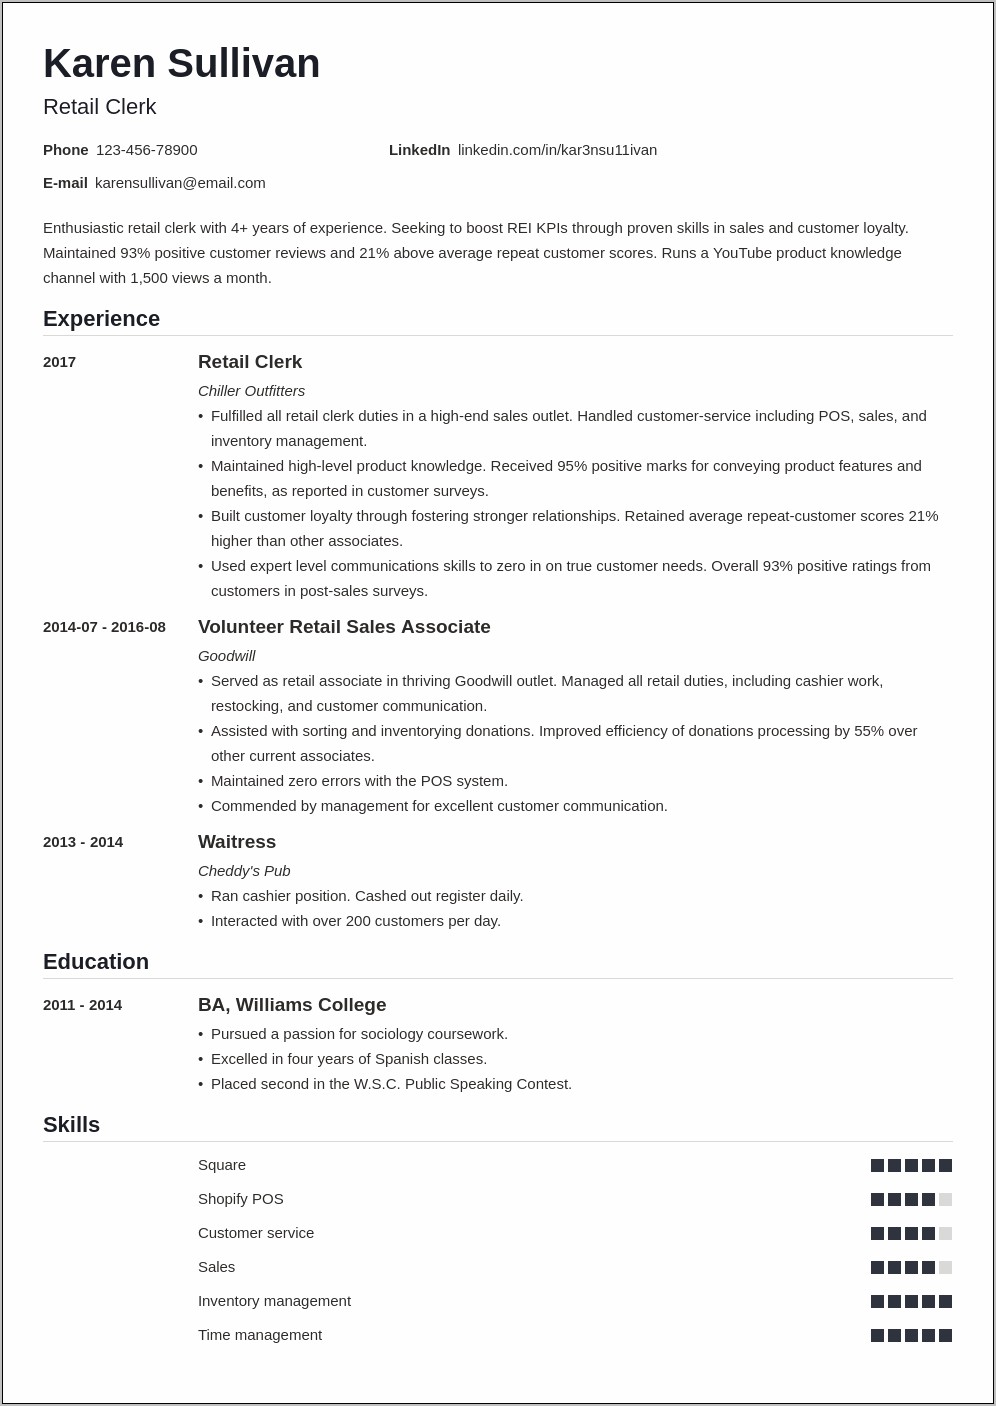 Examples Of Retail Skills For Resume